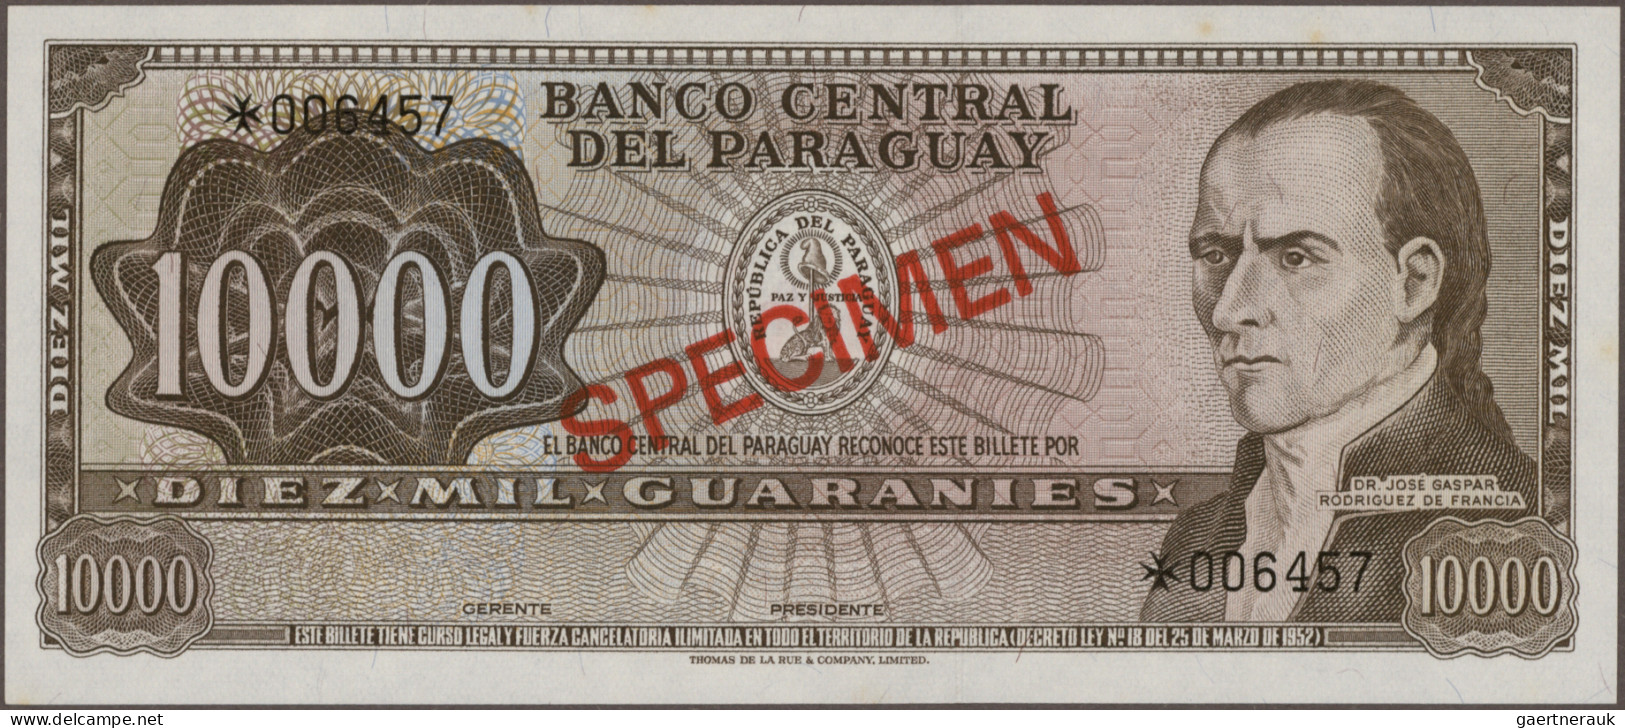 Paraguay: Banco Central del Paraguay, huge lot with 26 banknotes, series 1962-20